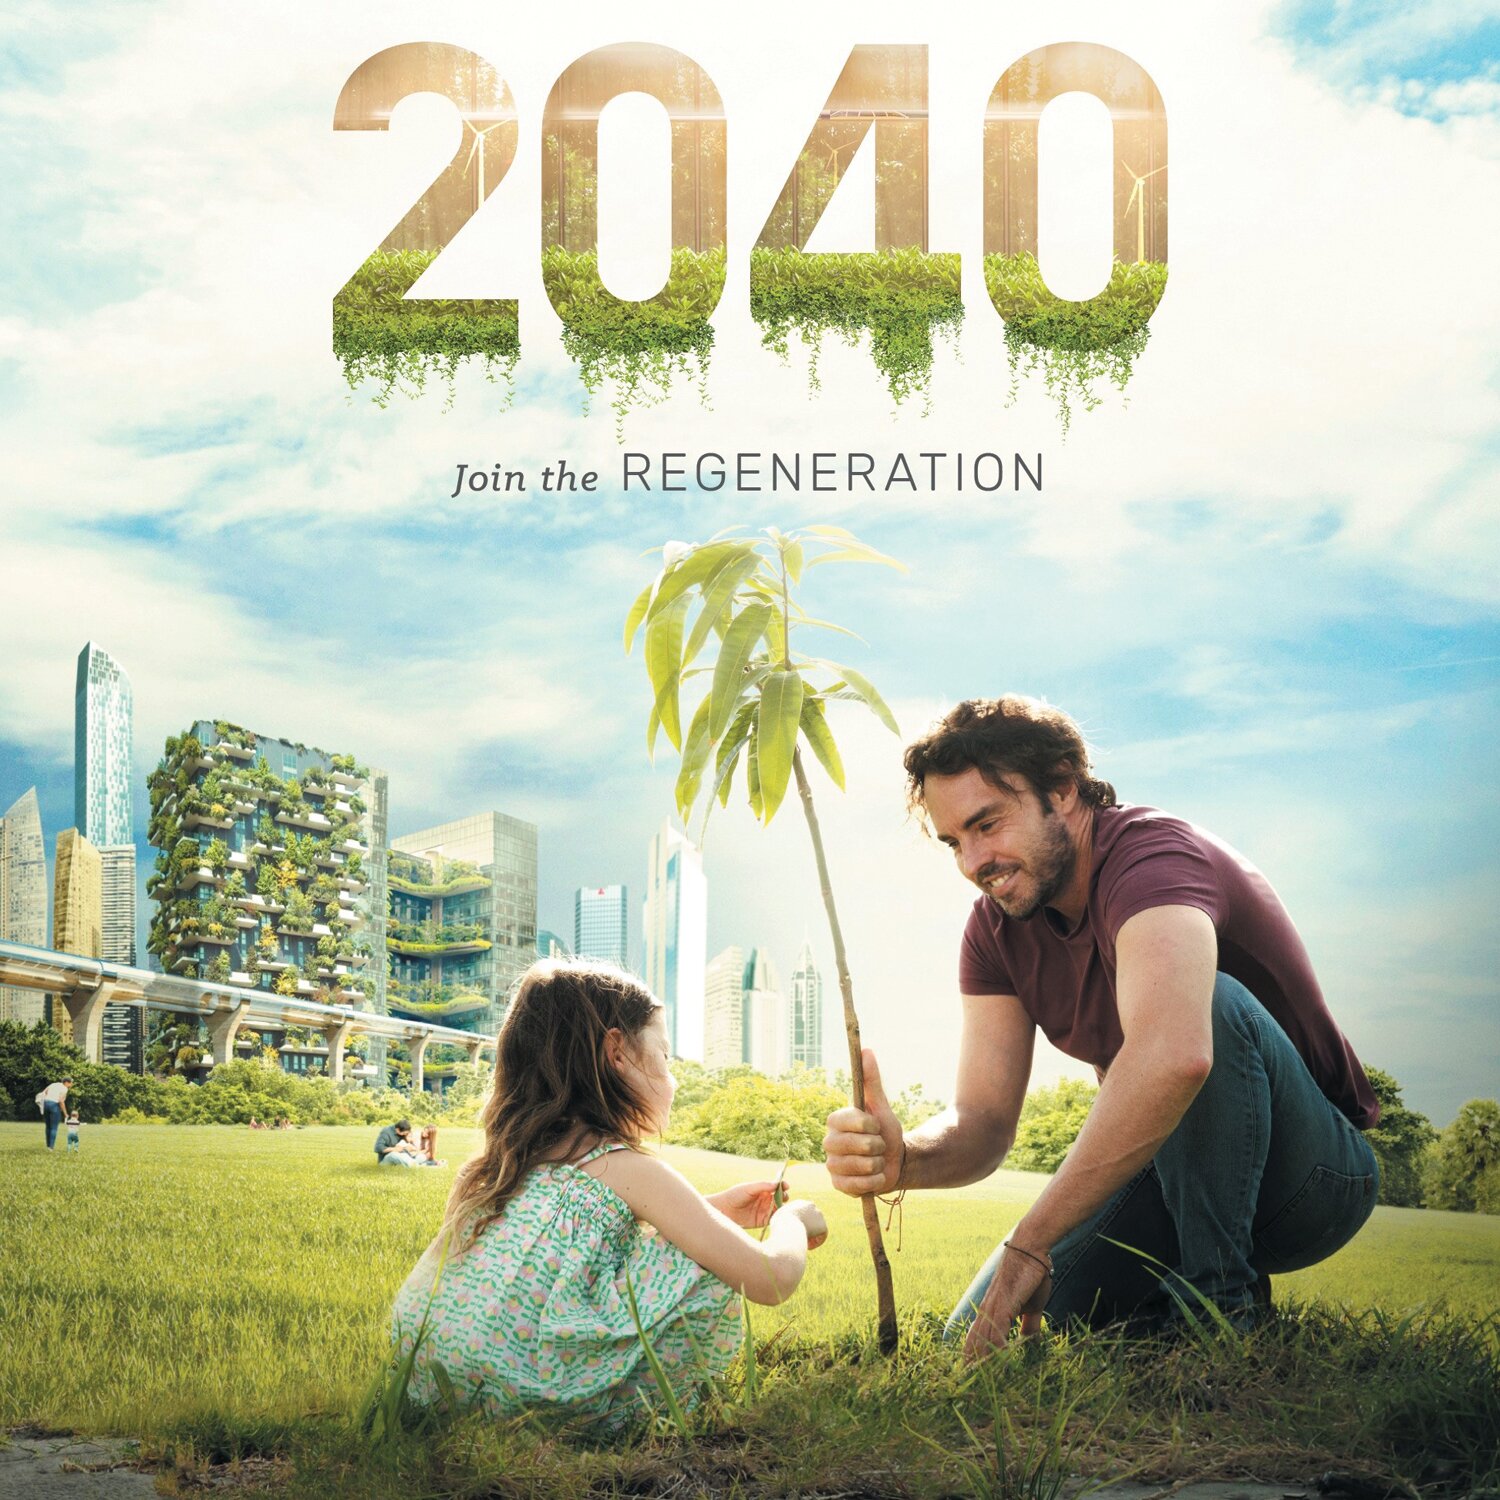 The film “2040,” which imagines a world where climate change has been solved, will be screened at Newtown Theatre.